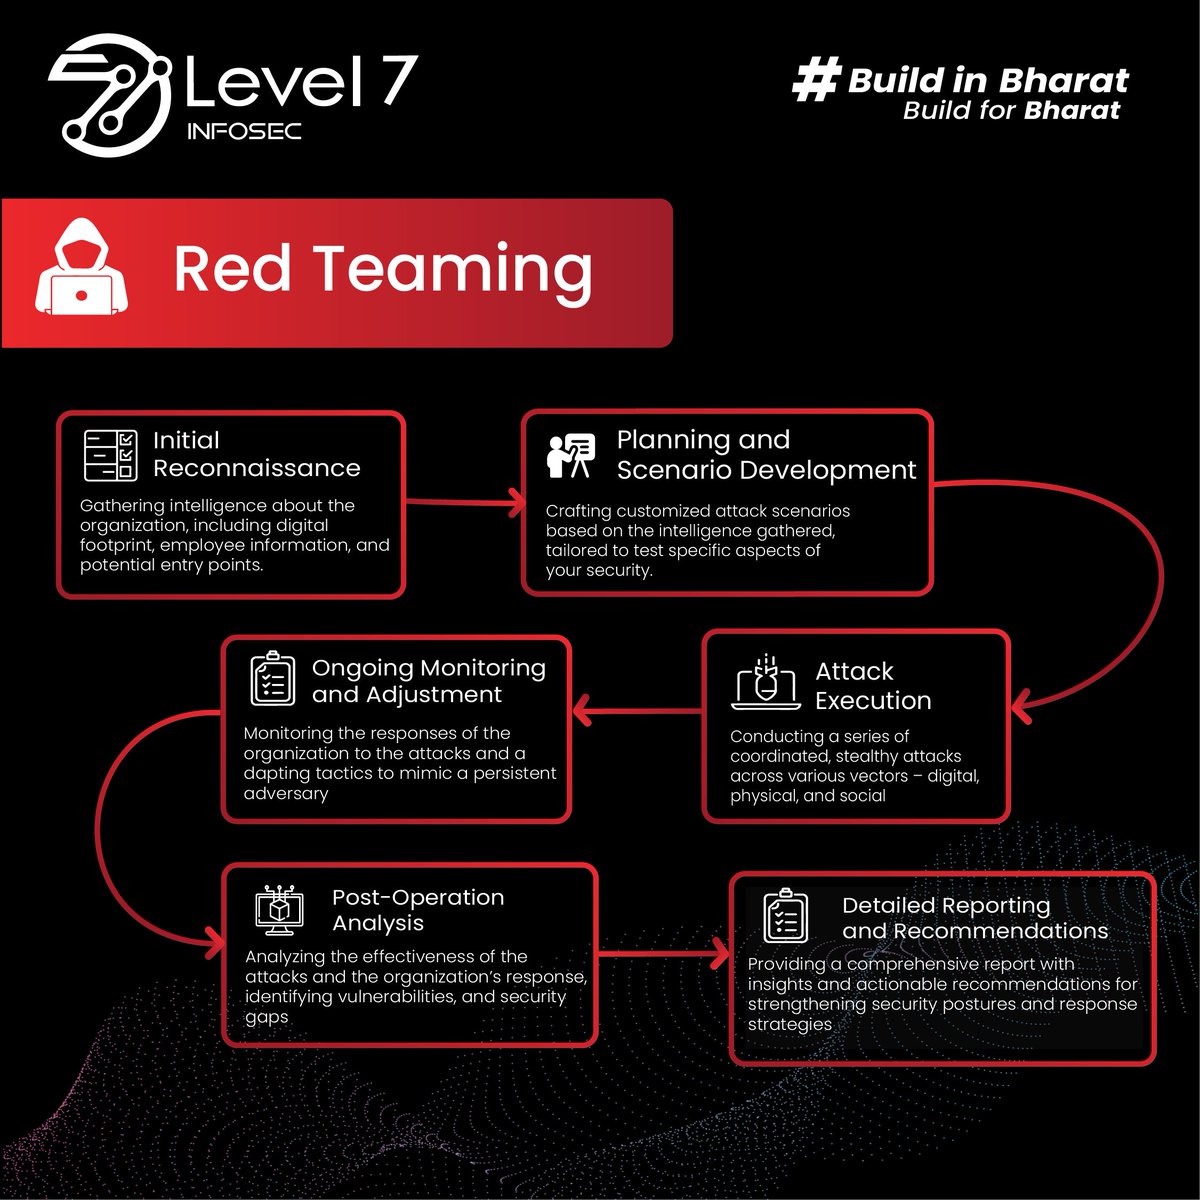 🛡️Don't be surprised by a real attack! Red Teaming simulates real-world threats, allowing you to proactively strengthen your security measures.

@cehtej @HubC3i @IITKanpur 
#redteaming #redteamexercise #securitysolutions #securityfirst #Security #Smallbuisness #StartupIndia 
#iit